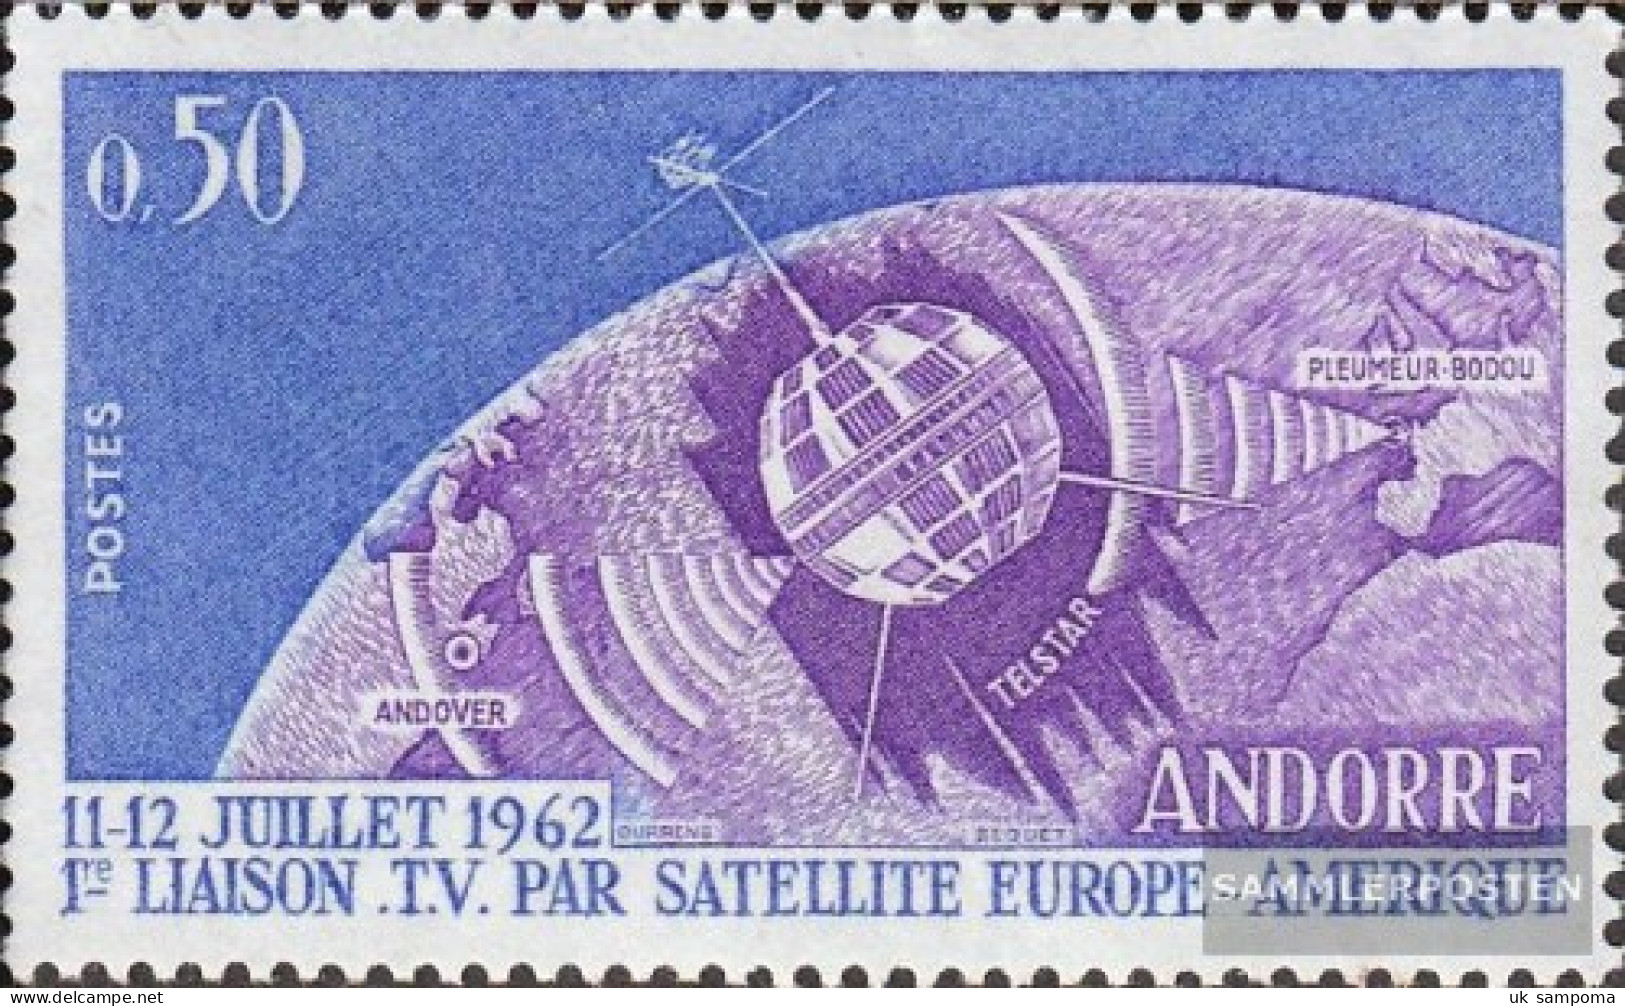 Andorra - French Post 178 (complete Issue) Volume 1962 Completeett Unmounted Mint / Never Hinged 1962 Satellite TV - Carnets